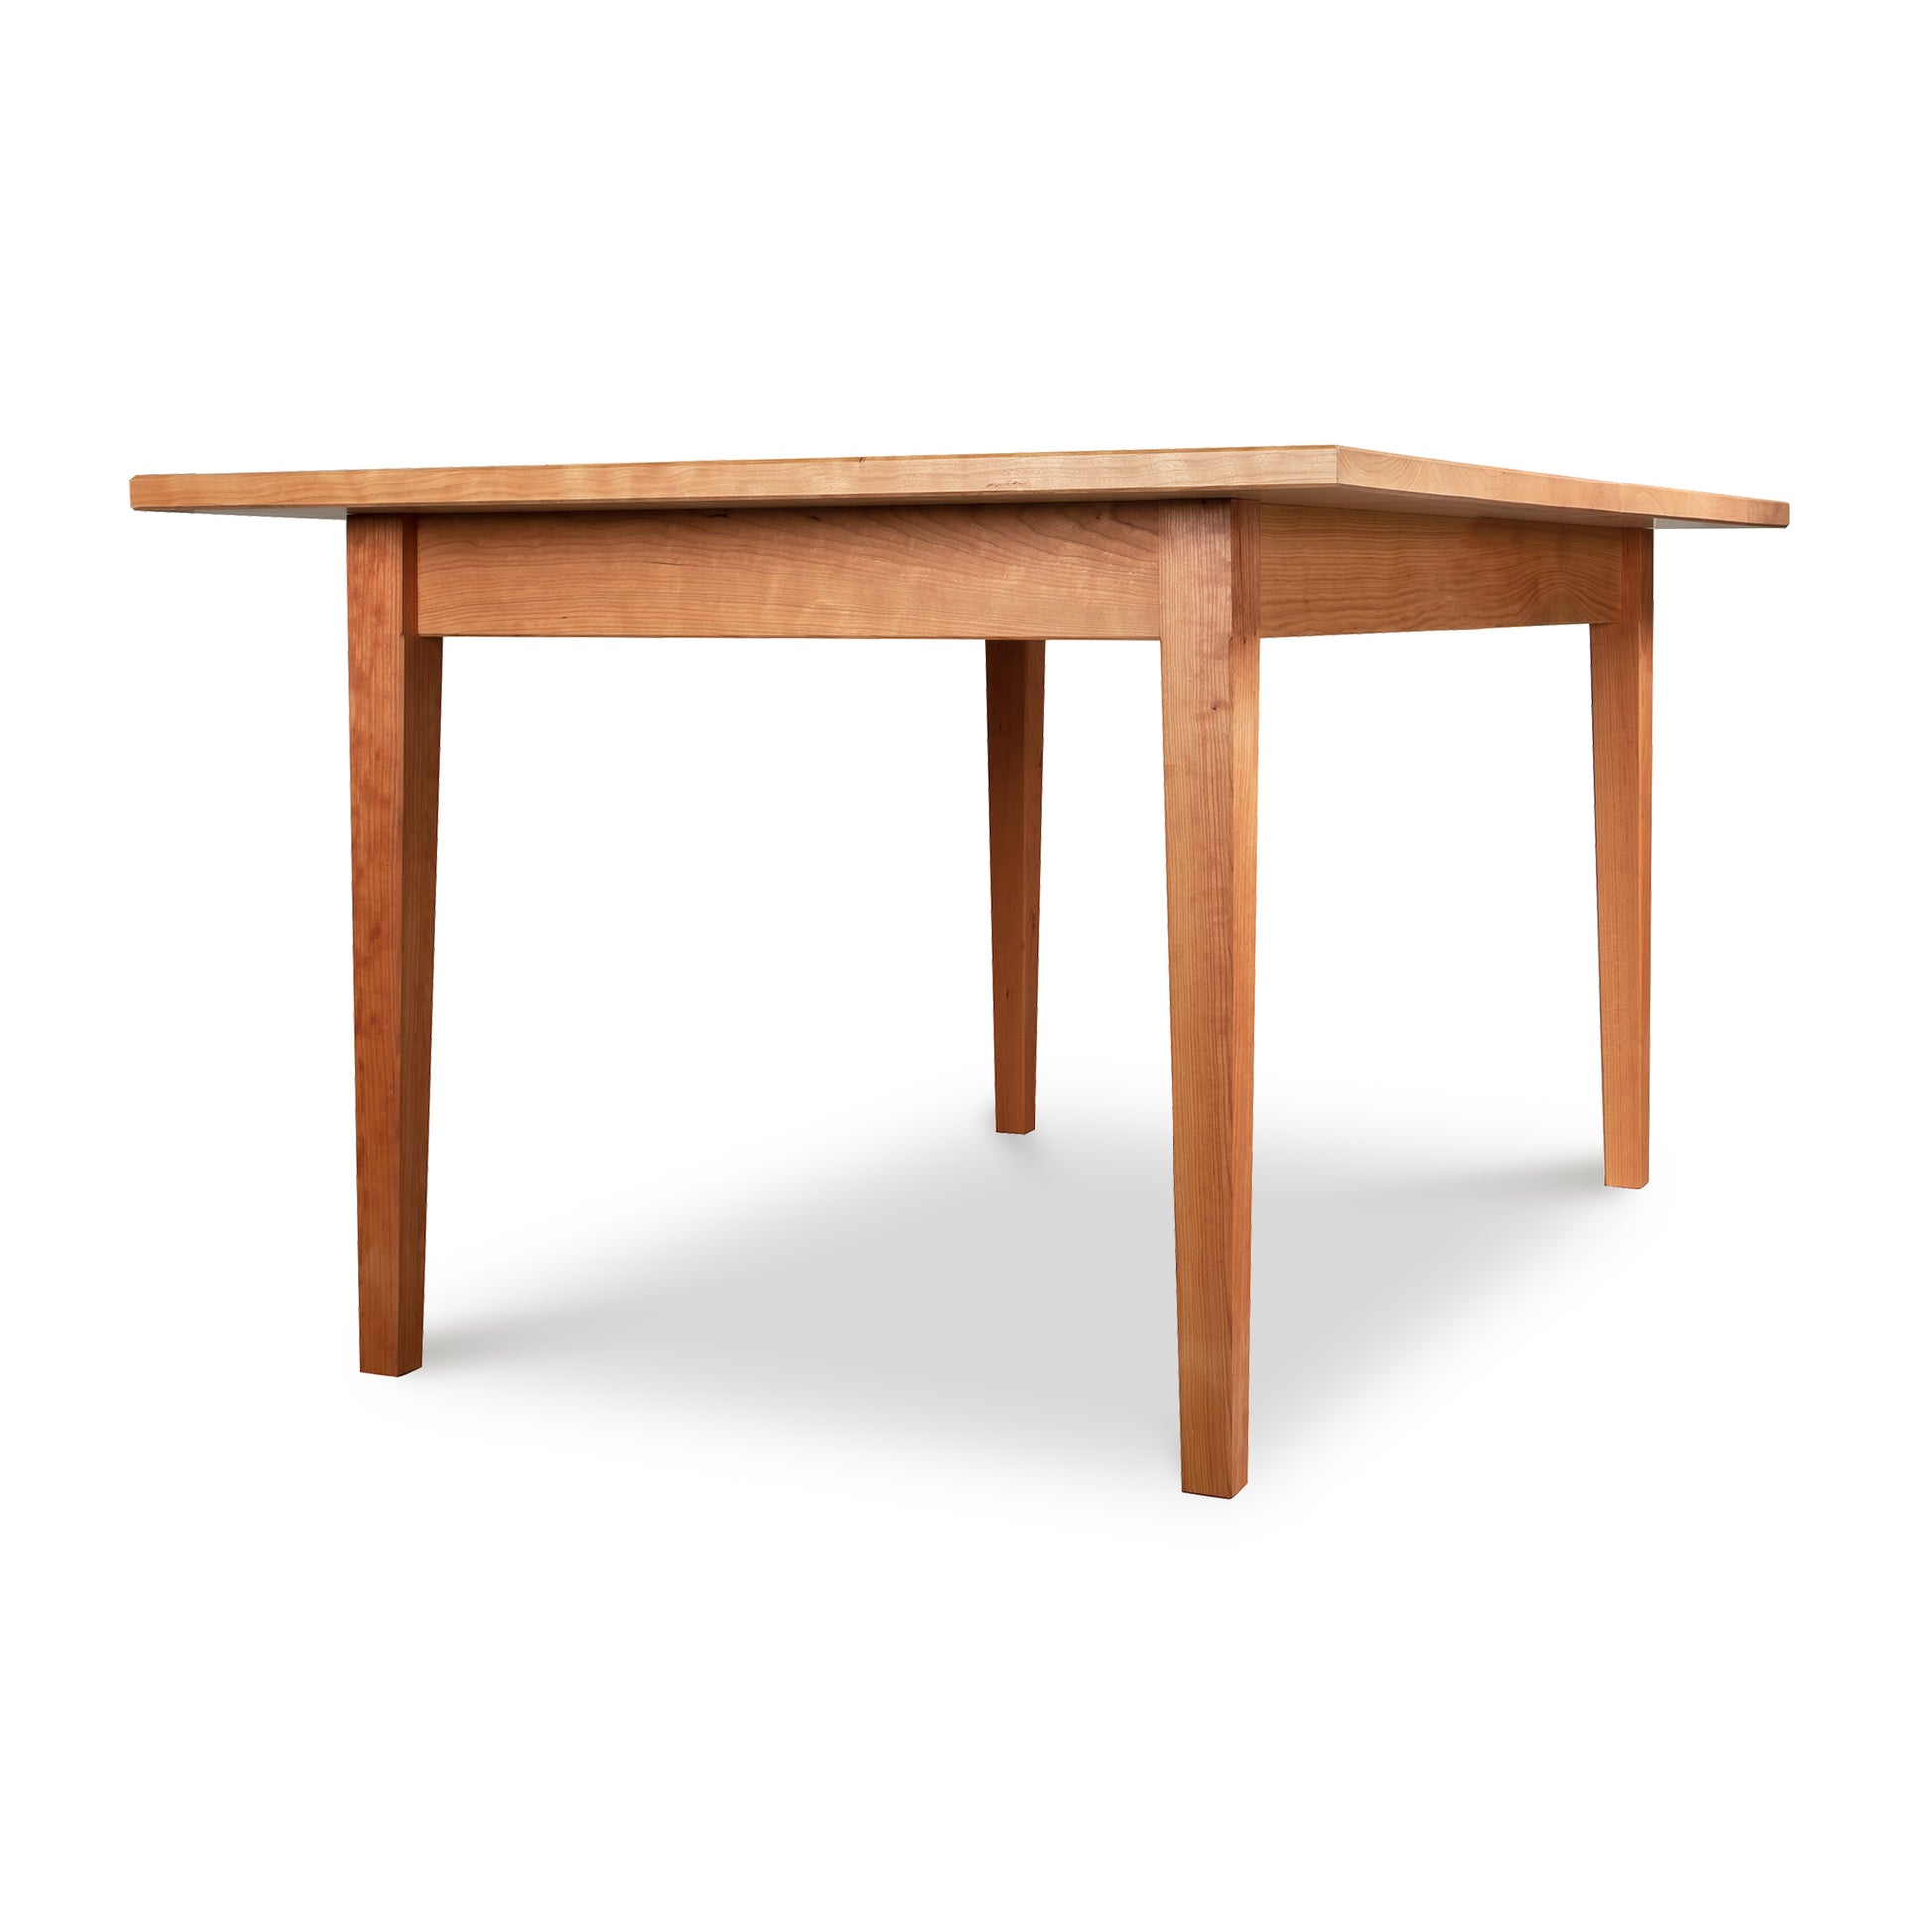 Alt Text: Vermont Shaker Rectangular Solid Top Dining Table by Maple Corner Woodworks in light brown finish - American-made, sustainably harvested solid wood furniture with four straight legs and a simple, modern design. Plain white background.